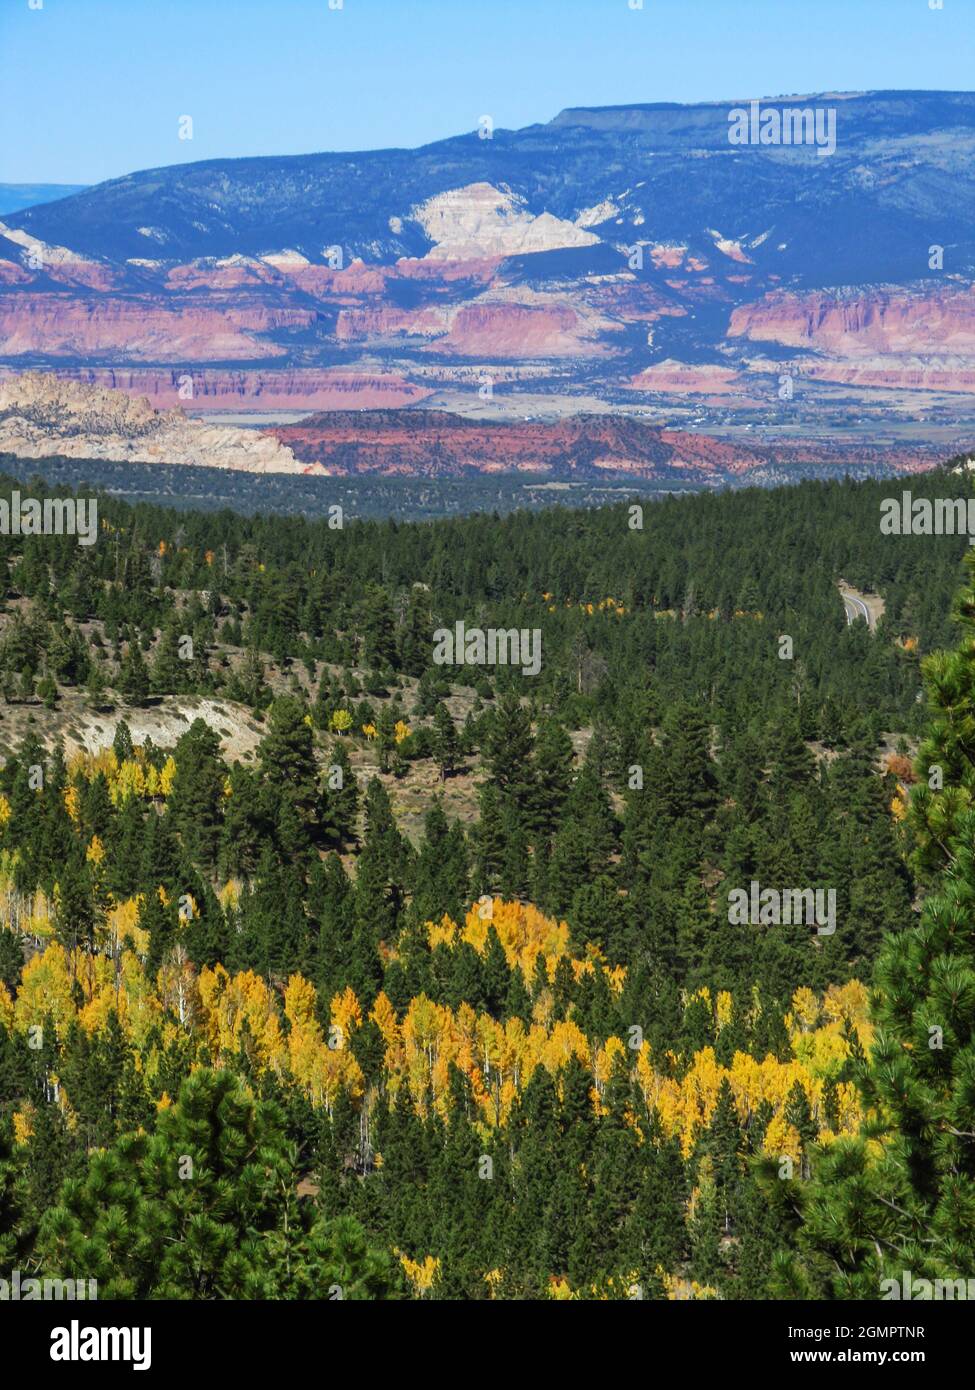 View over the mountains and cliffs of the Aquarius Plateau with aspen, fir and pine forest in the foreground Stock Photo